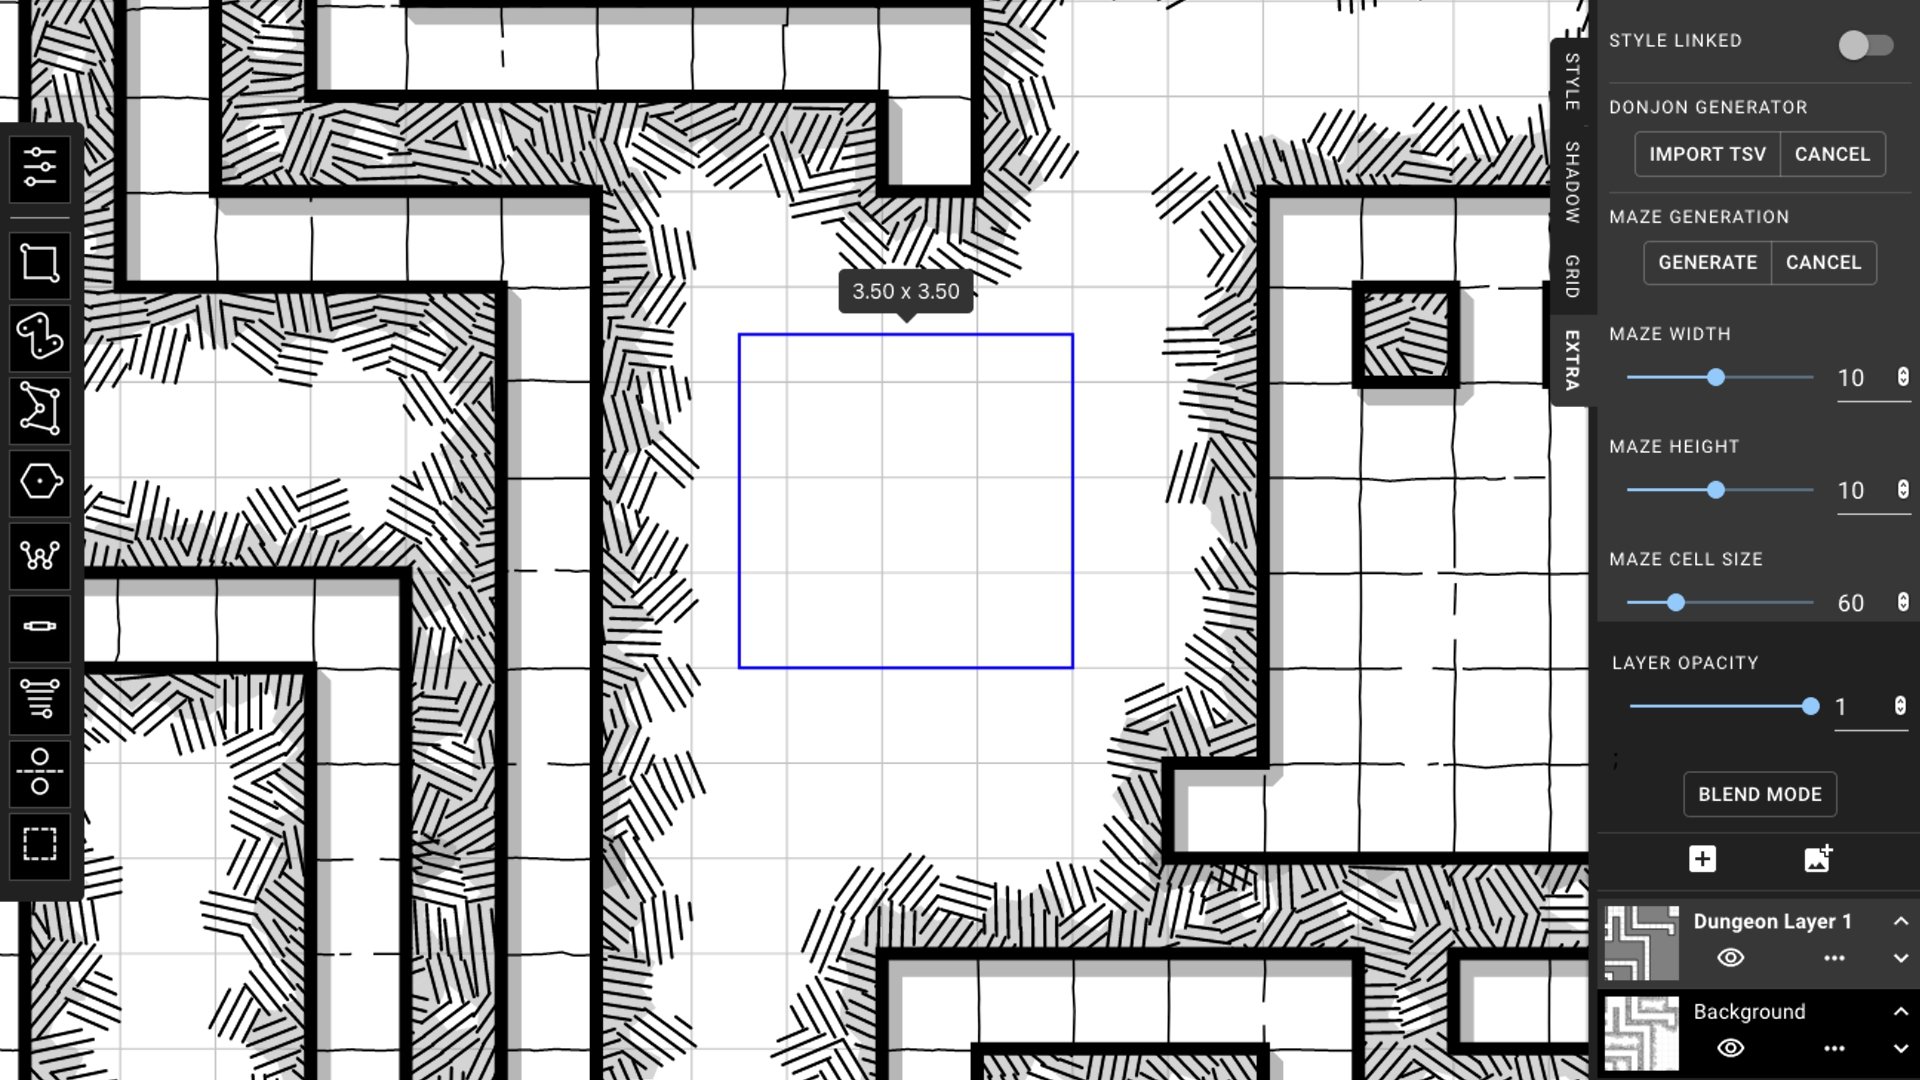 DnD maps and best DnD map makers: Author screenshot showing a DnD map from the Dungeonscrawl map maker